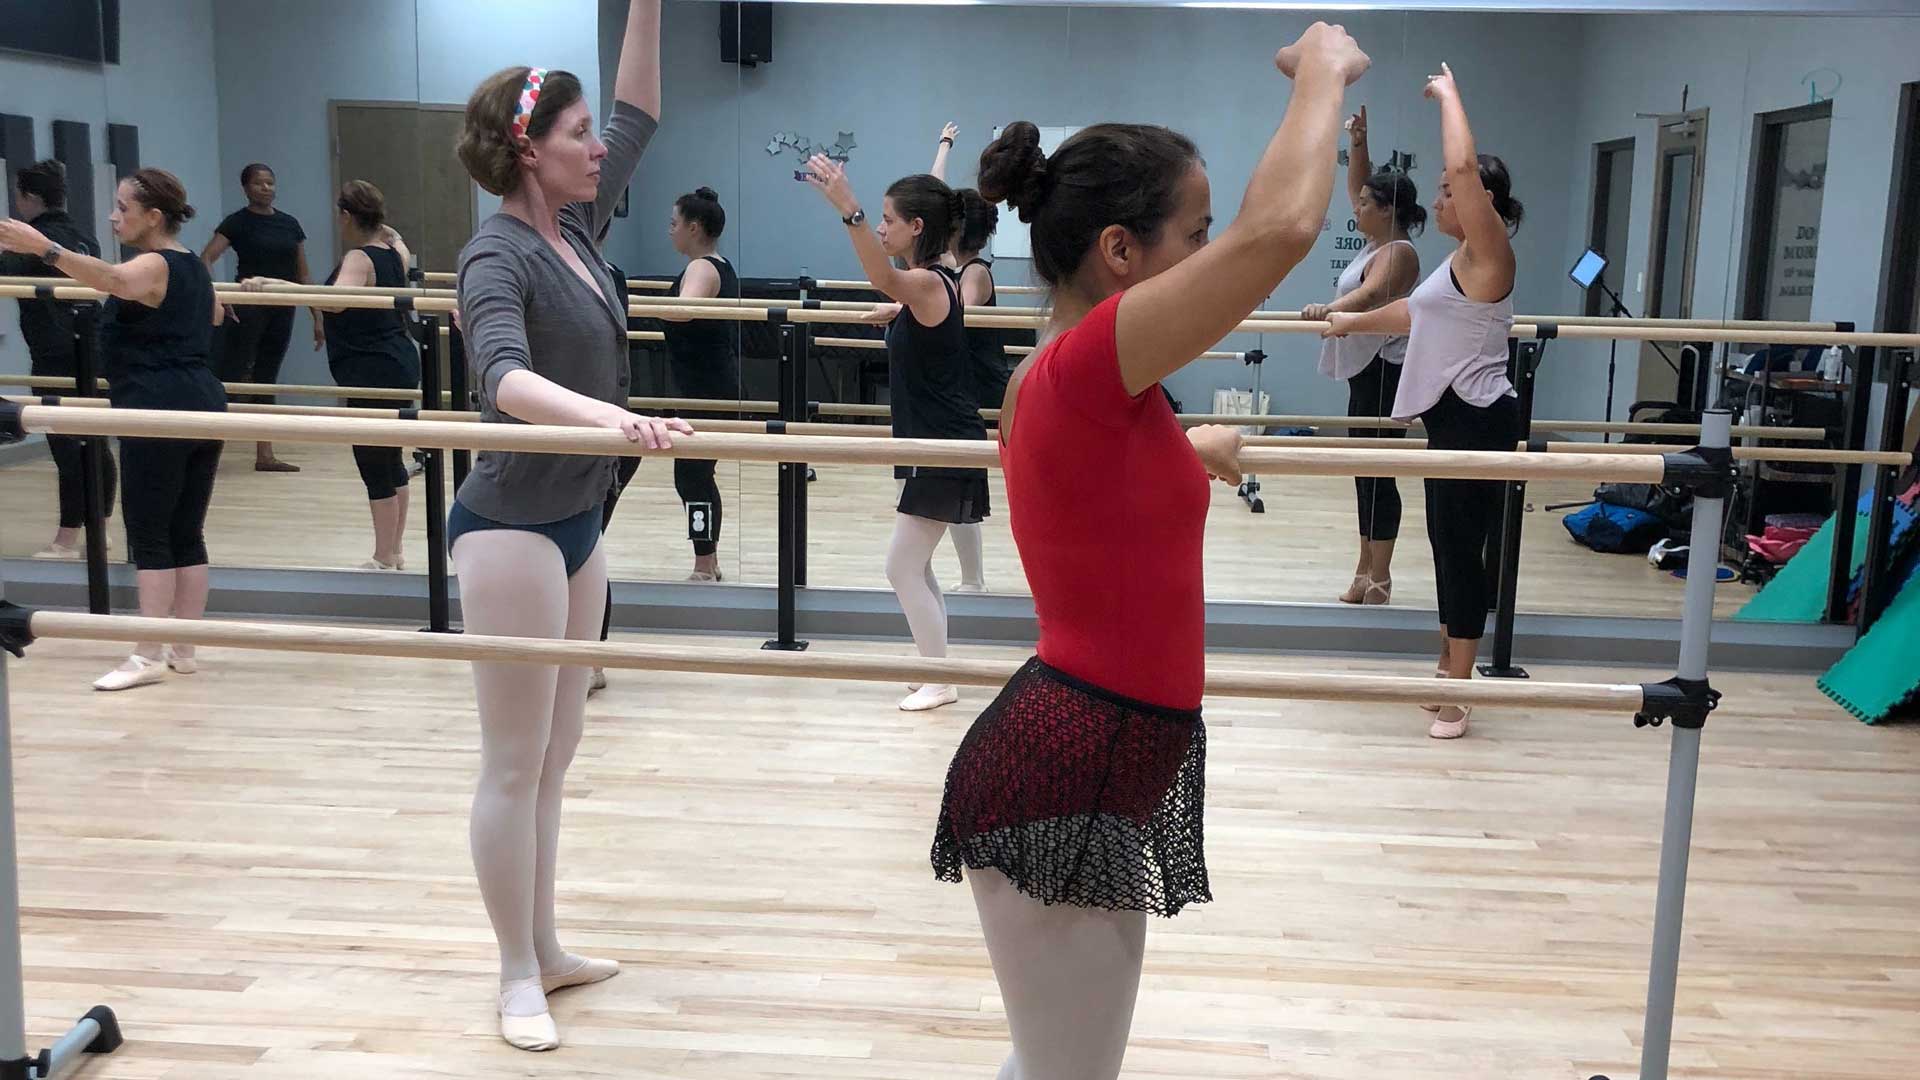 Dance Instruction for Adults in Ballet, Hip-Hop, Tap, Modern, Contemporary and more in New Orleans, Mandeville, Covington